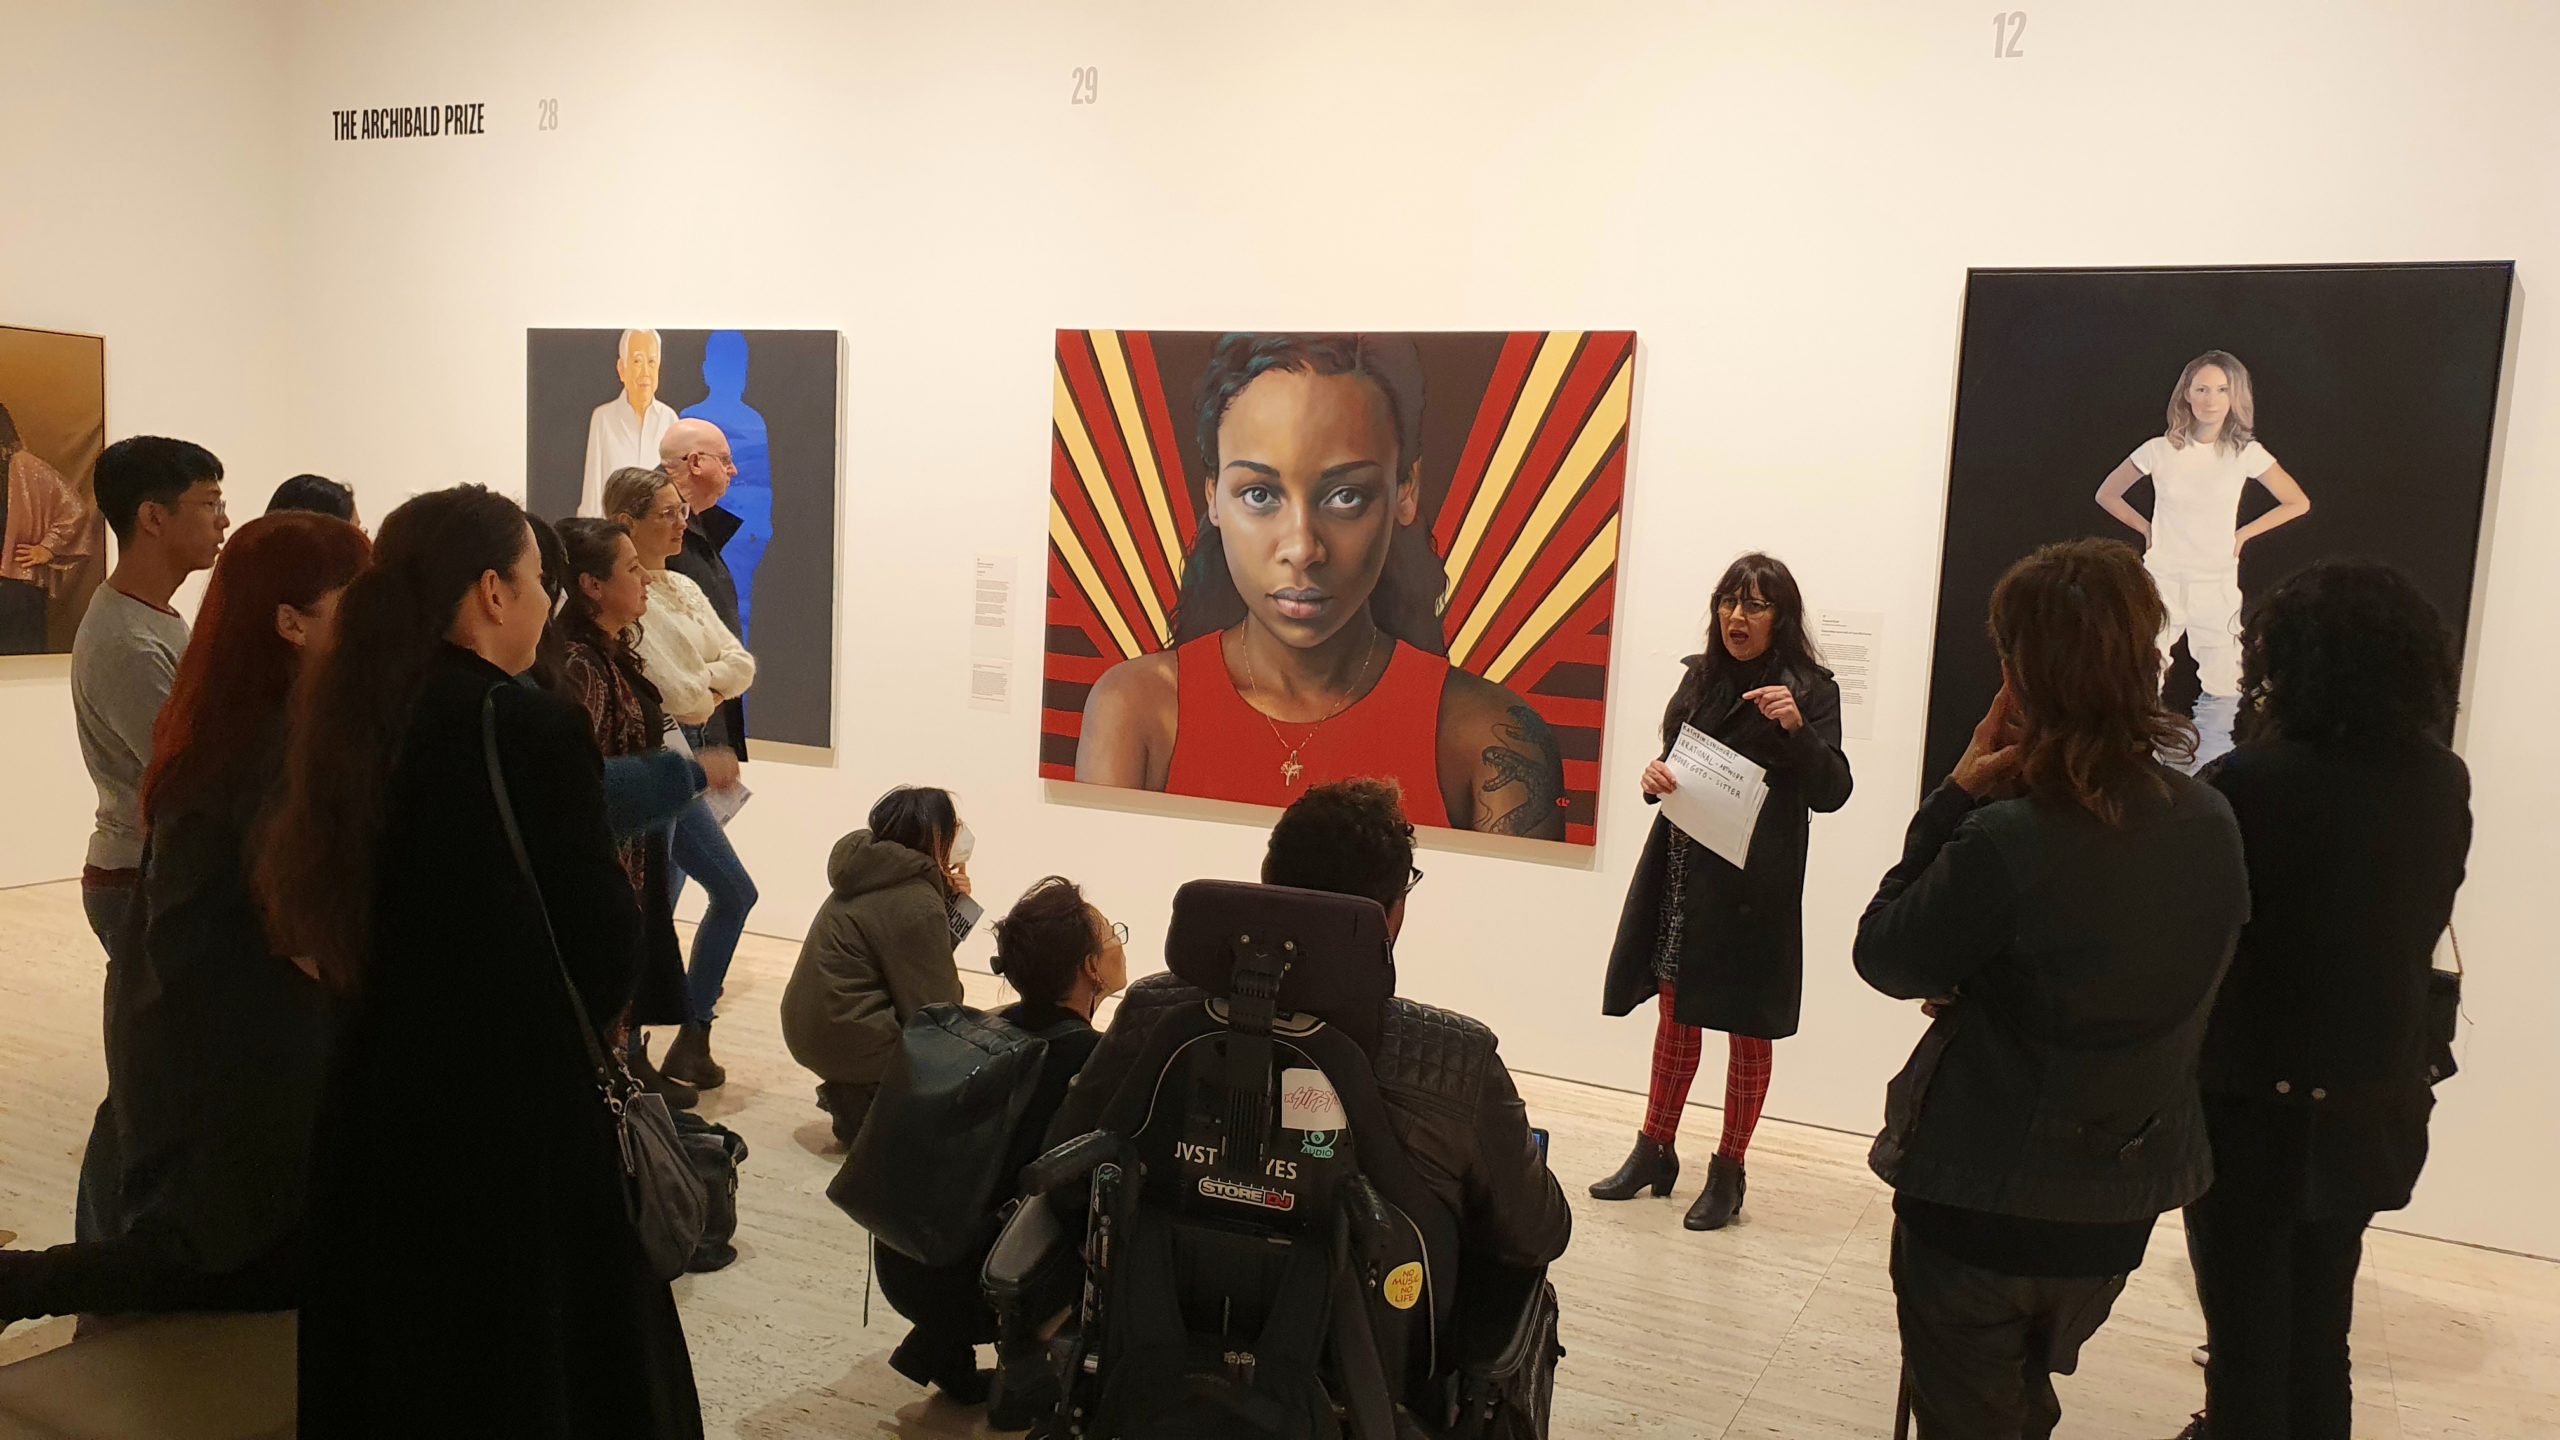 Artist Angie Goto leads a tour of the Archibald Prize 2022